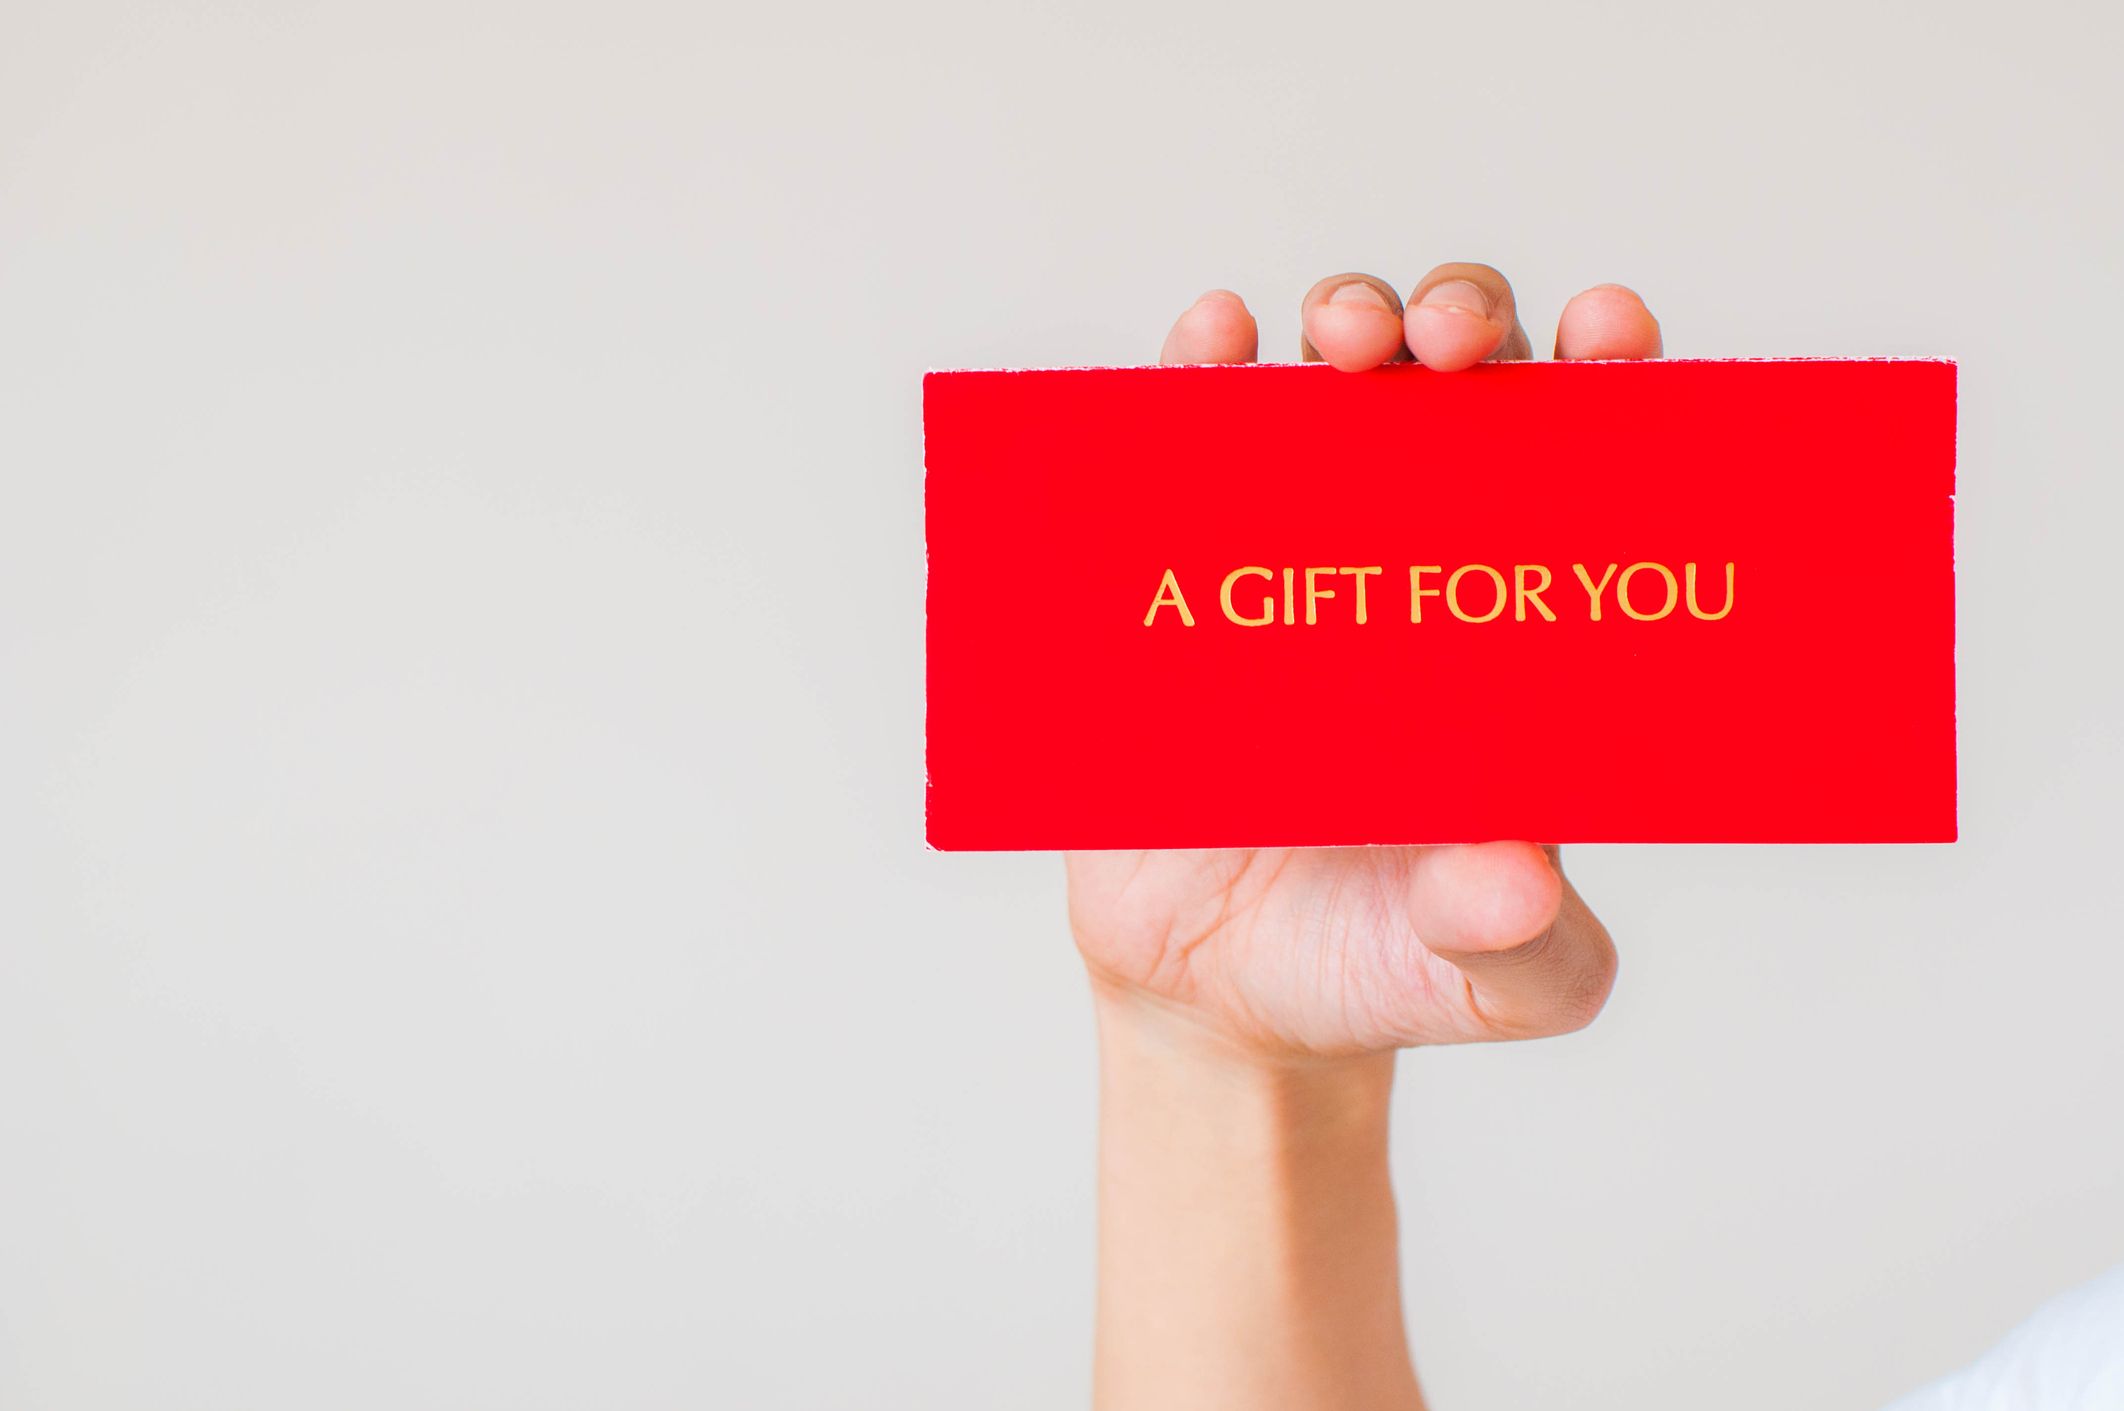 Gift card doesn't work? Here's what to do | wcnc.com